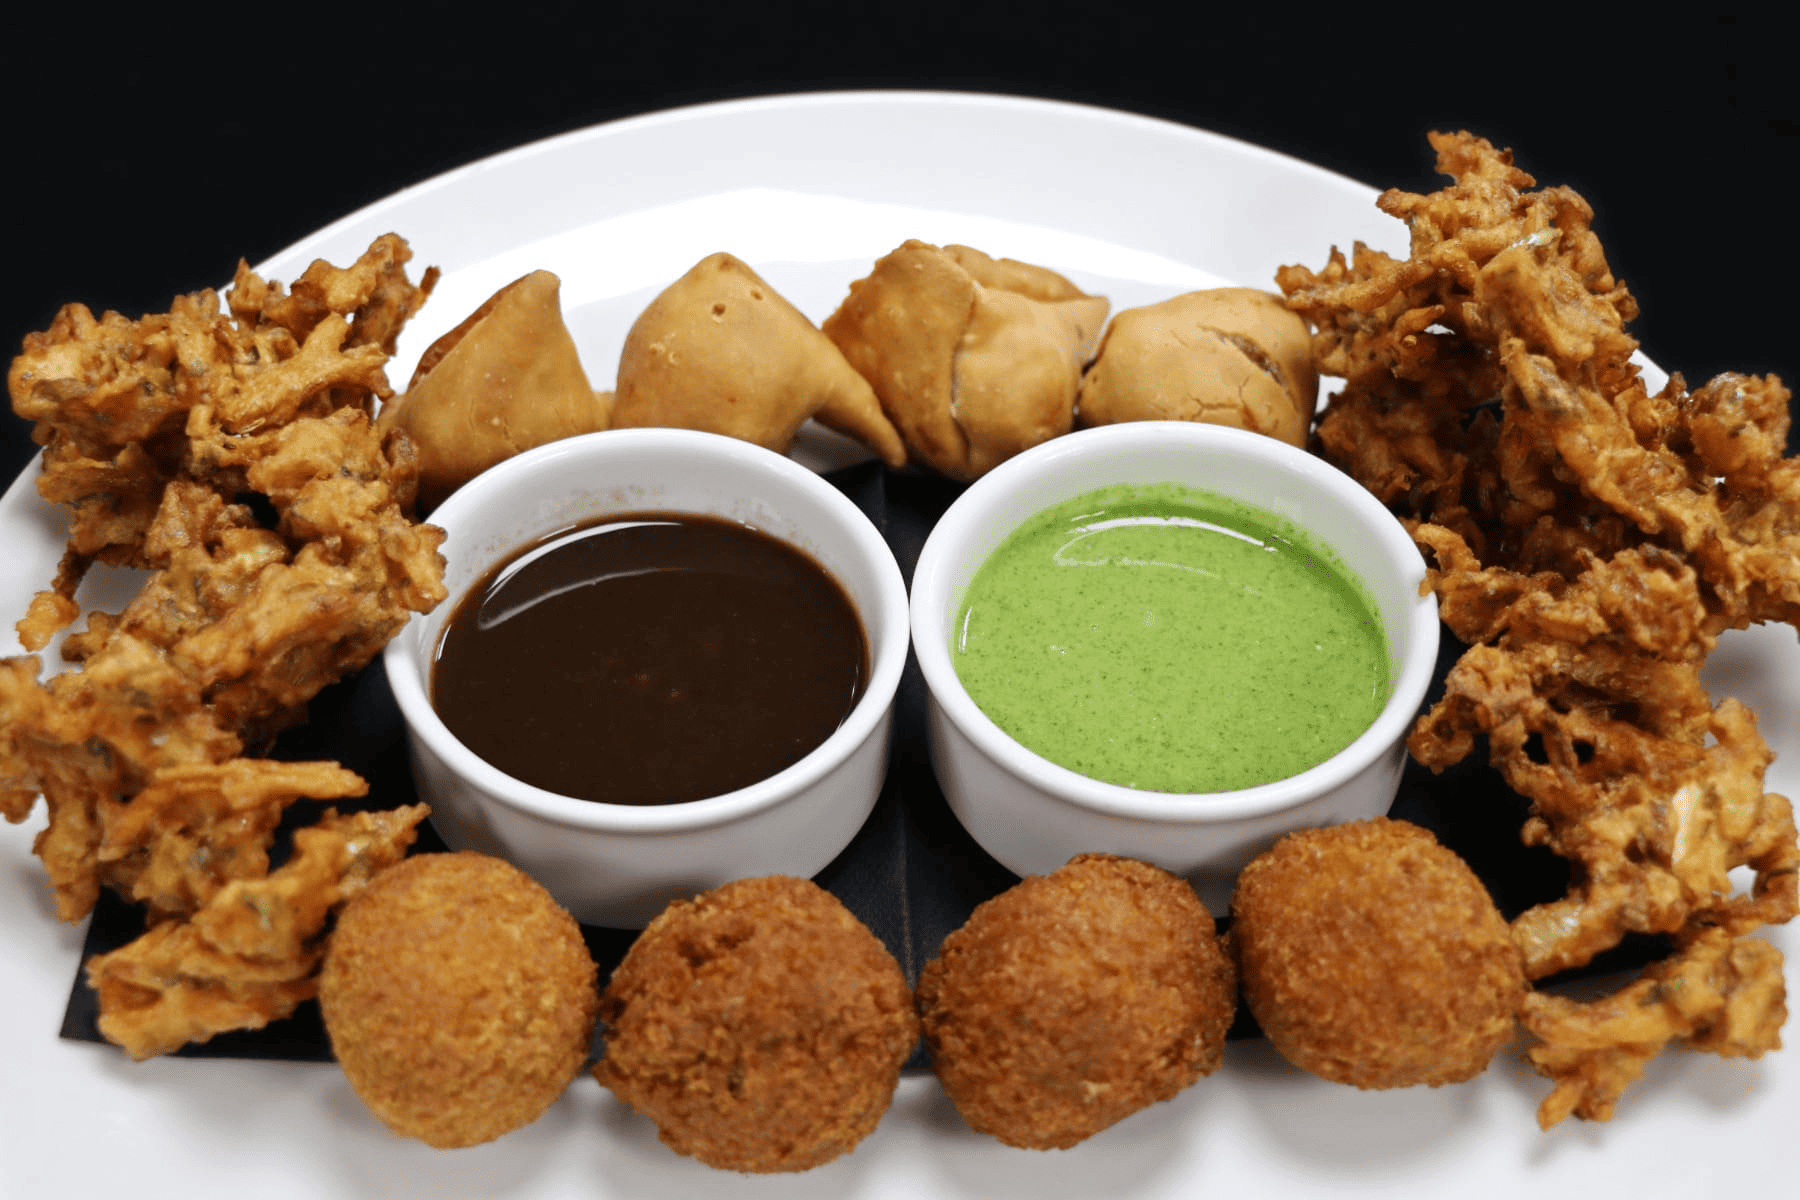 A variety of Indian entrees including fritters, onion bhaji, and samosas, served on a plate.